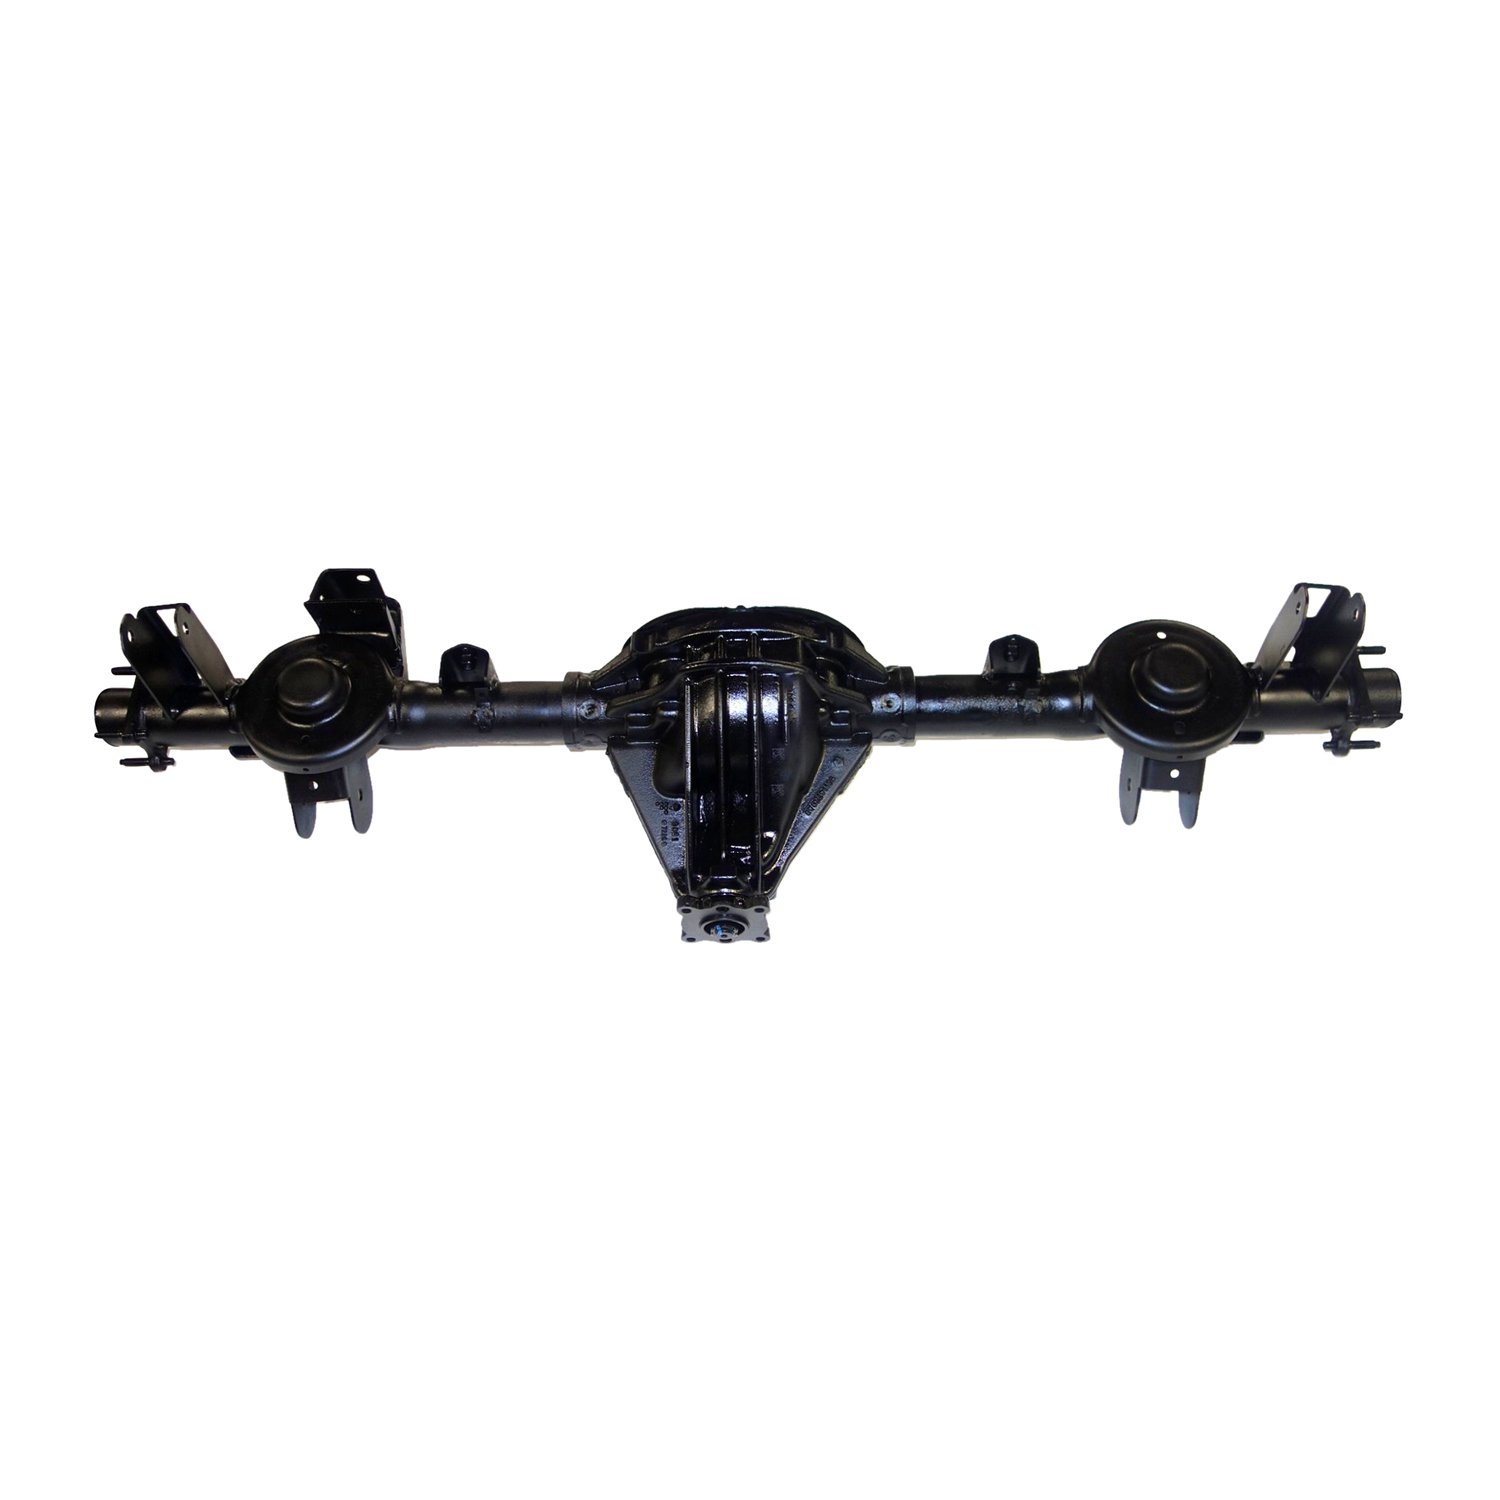 Remanufactured Complete Axle Assembly for Chy 8.25" 2005 Liberty 3.73 , 3.7l w/o ABS